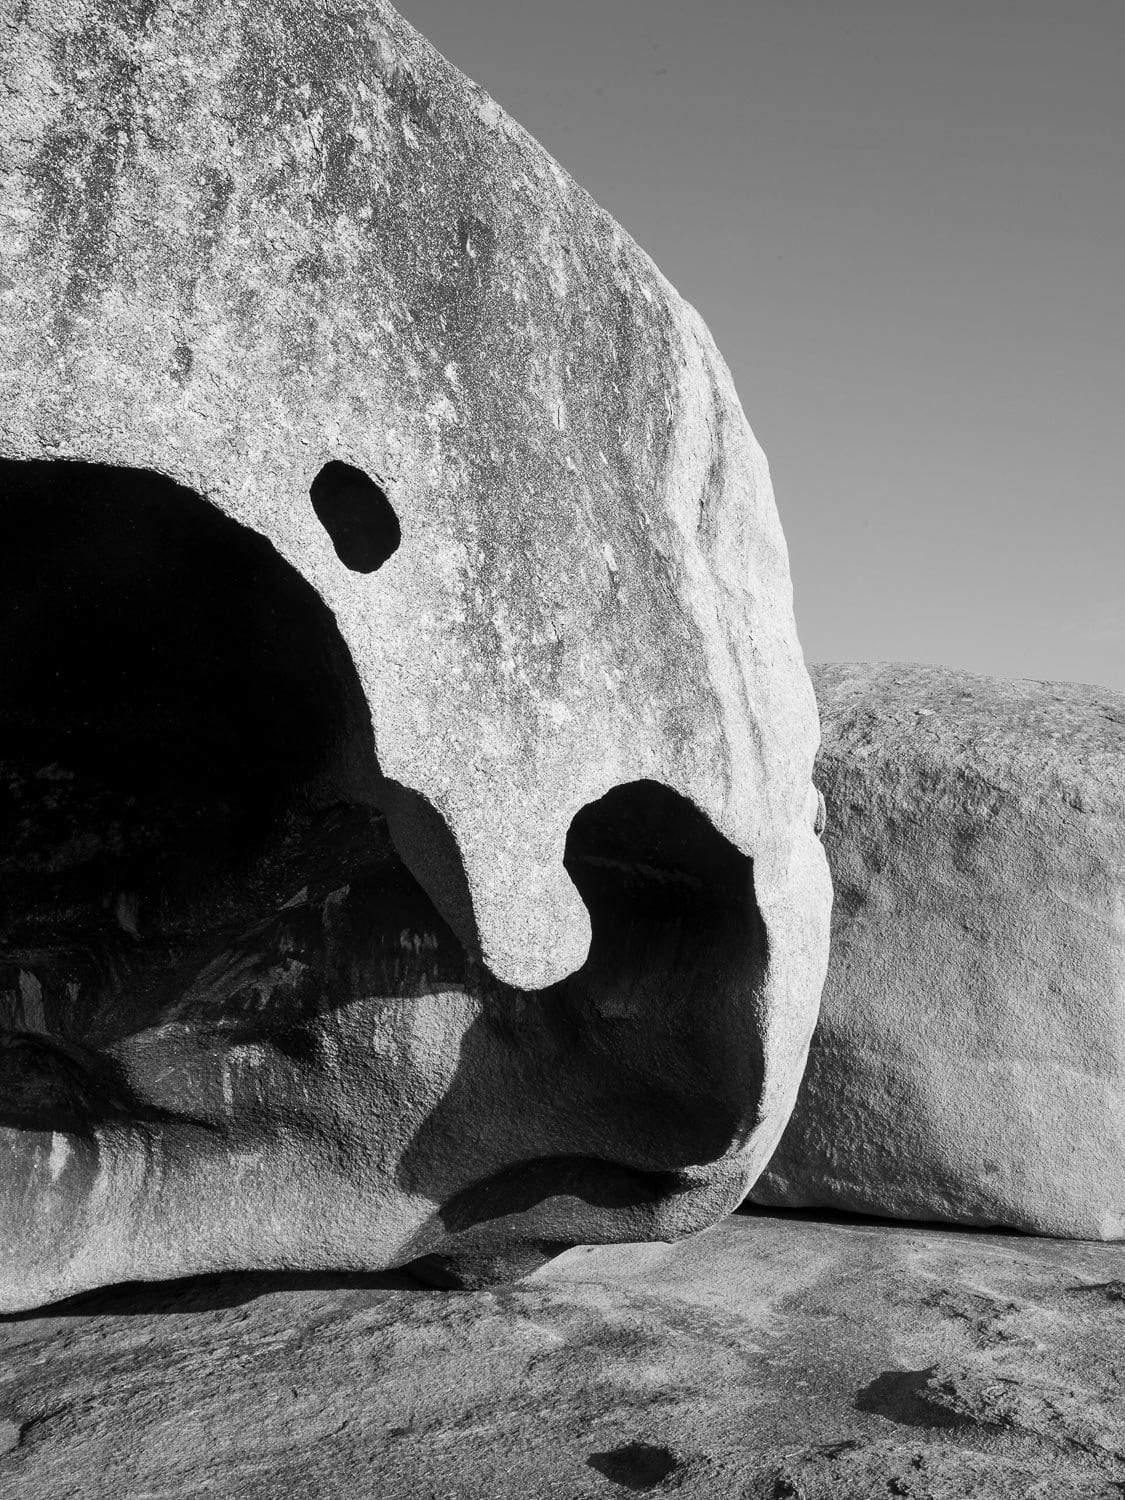 An opening tunnel face in a large rocky boulder, Remarkable Rocks #6 - Kangaroo Island SA